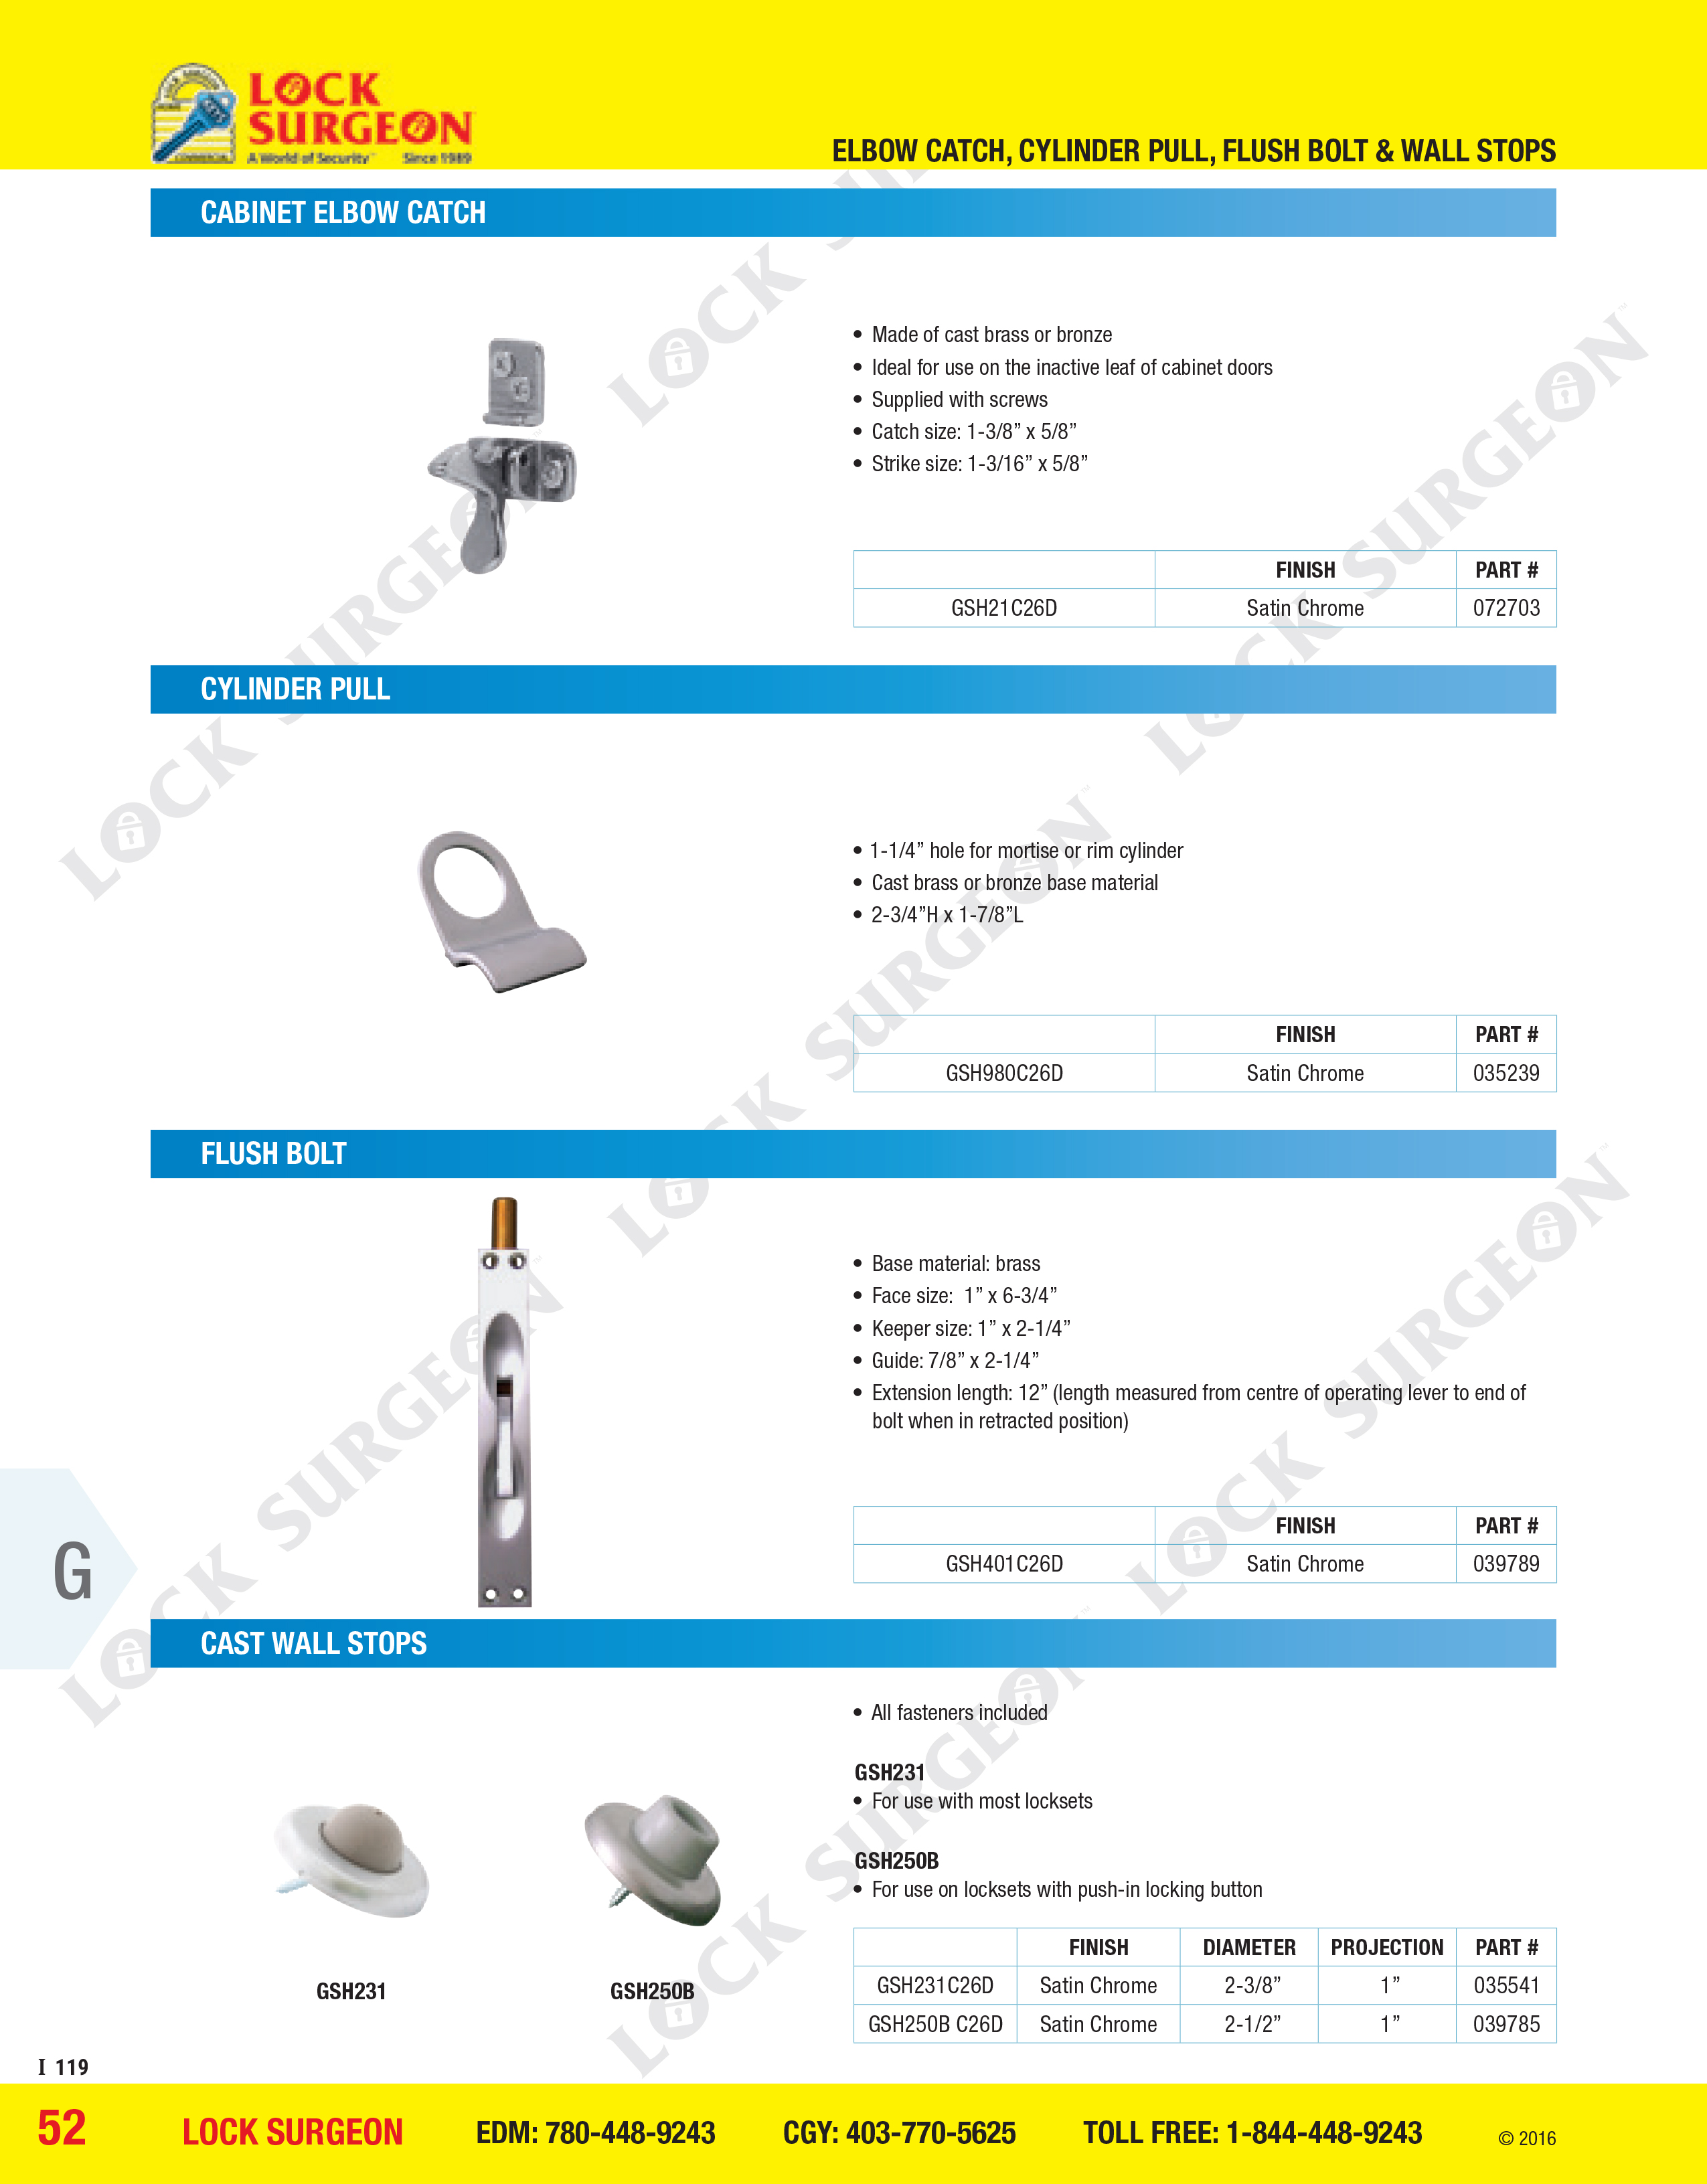 Cabinet elbow catch, cylinder pull, flush bolt and cast wall stops Acheson